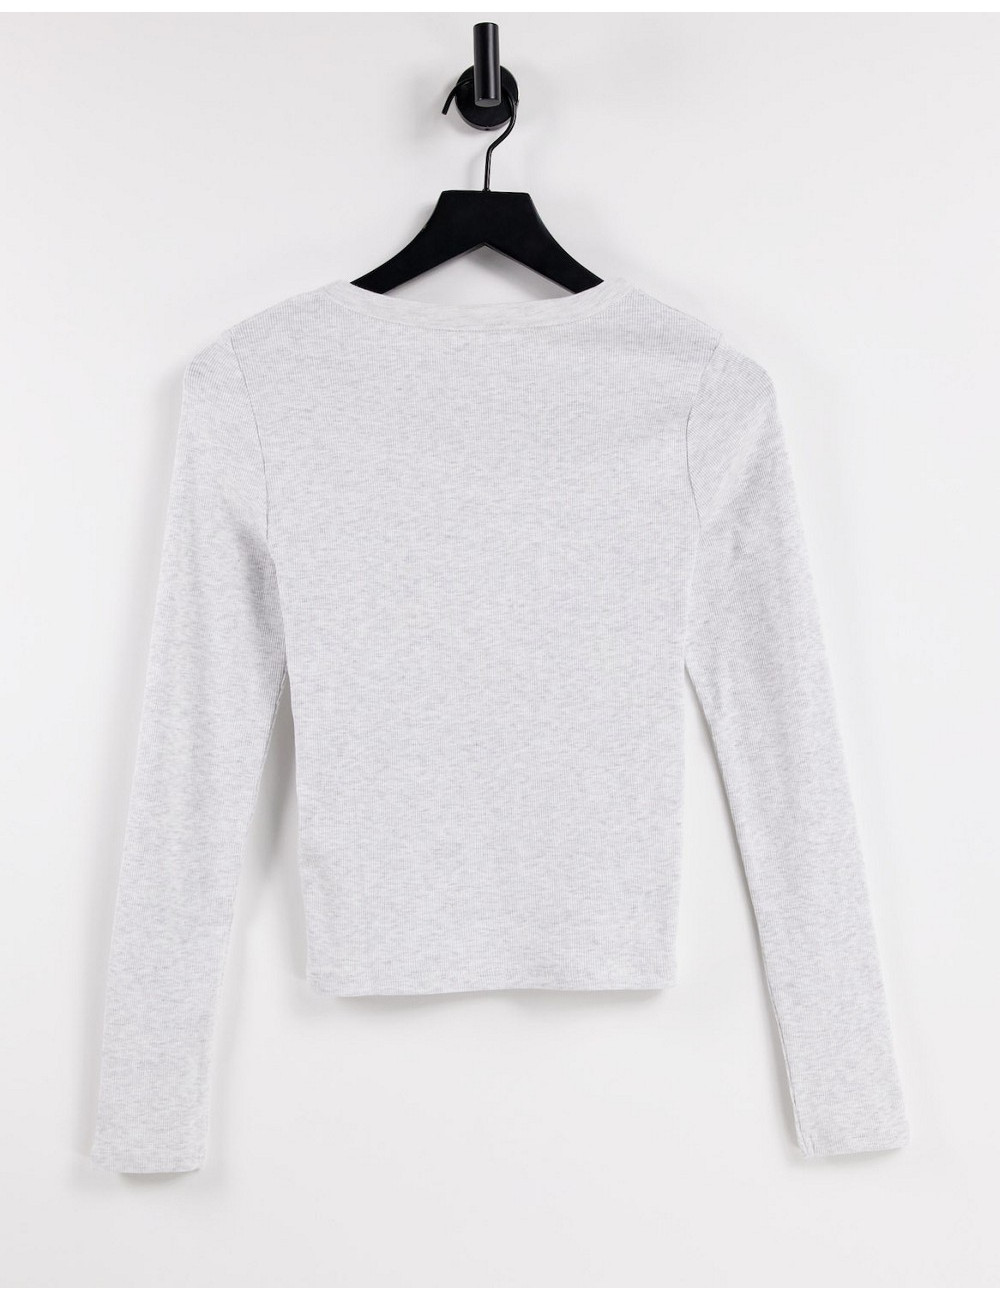 Cotton:On long sleeved top...